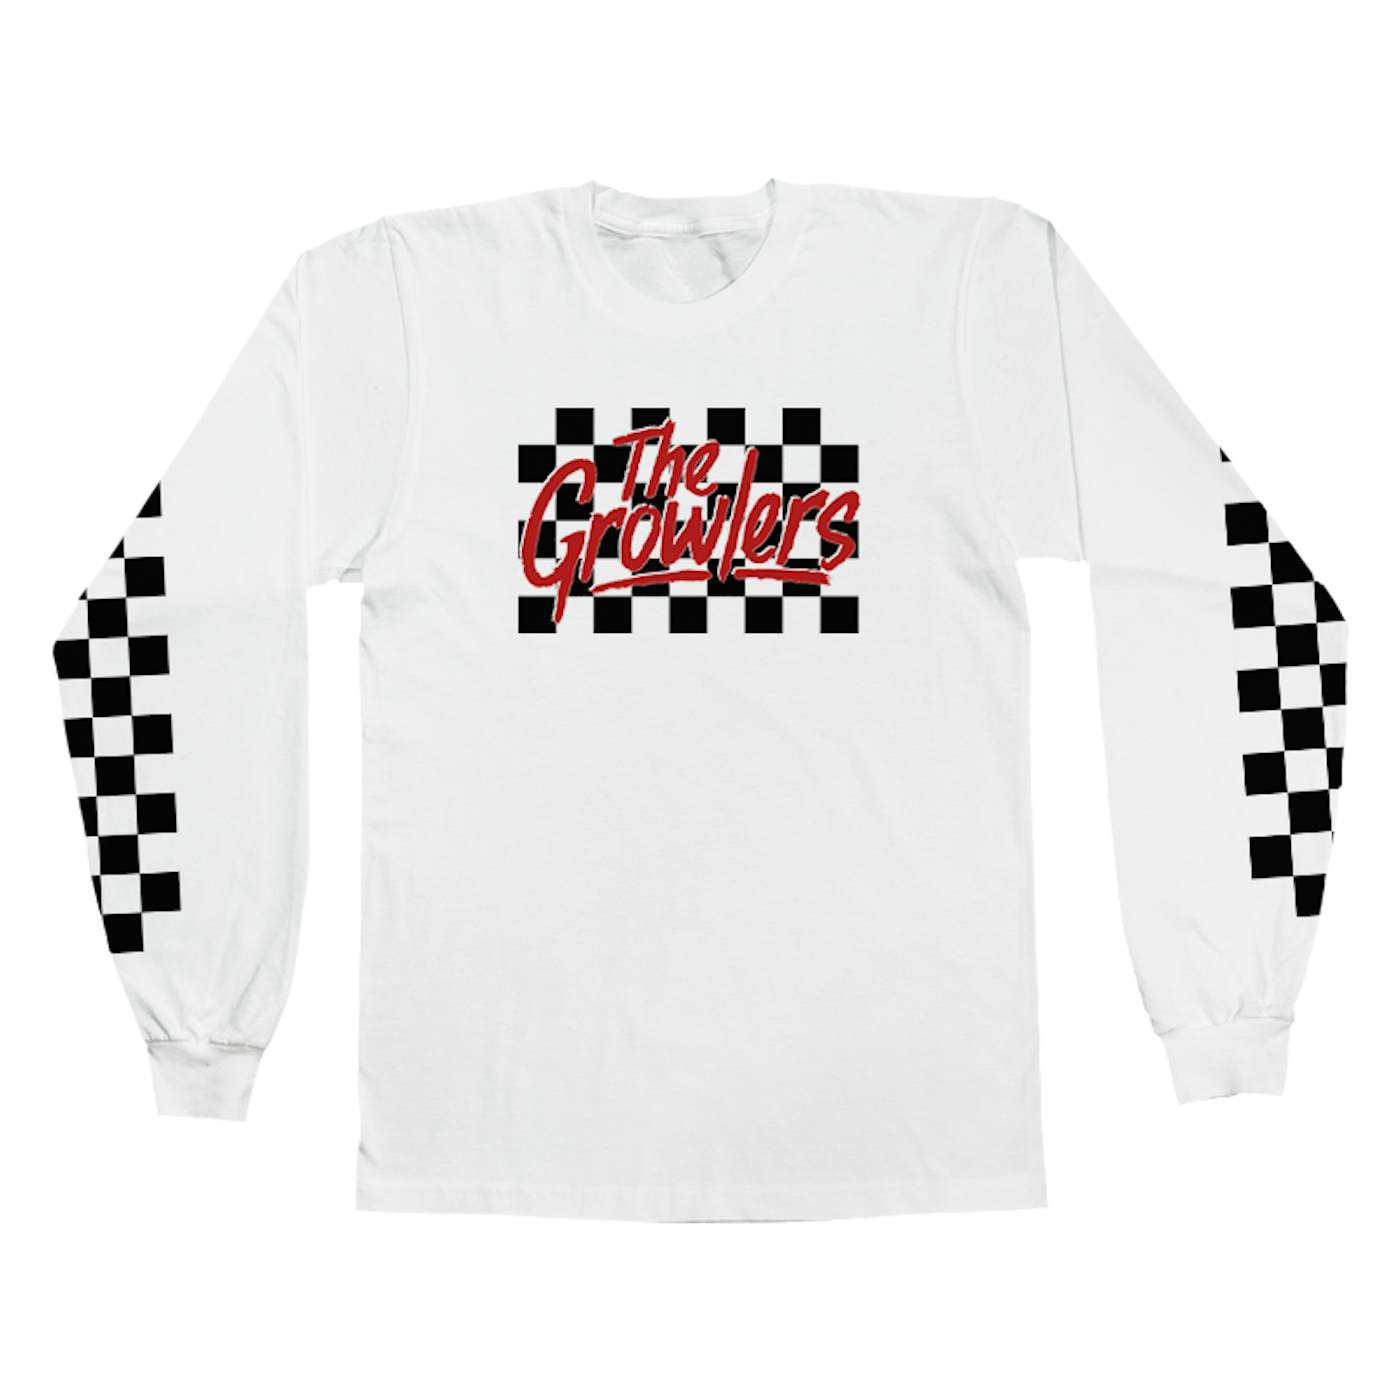 The Growlers Checkers Longsleeve T-Shirt